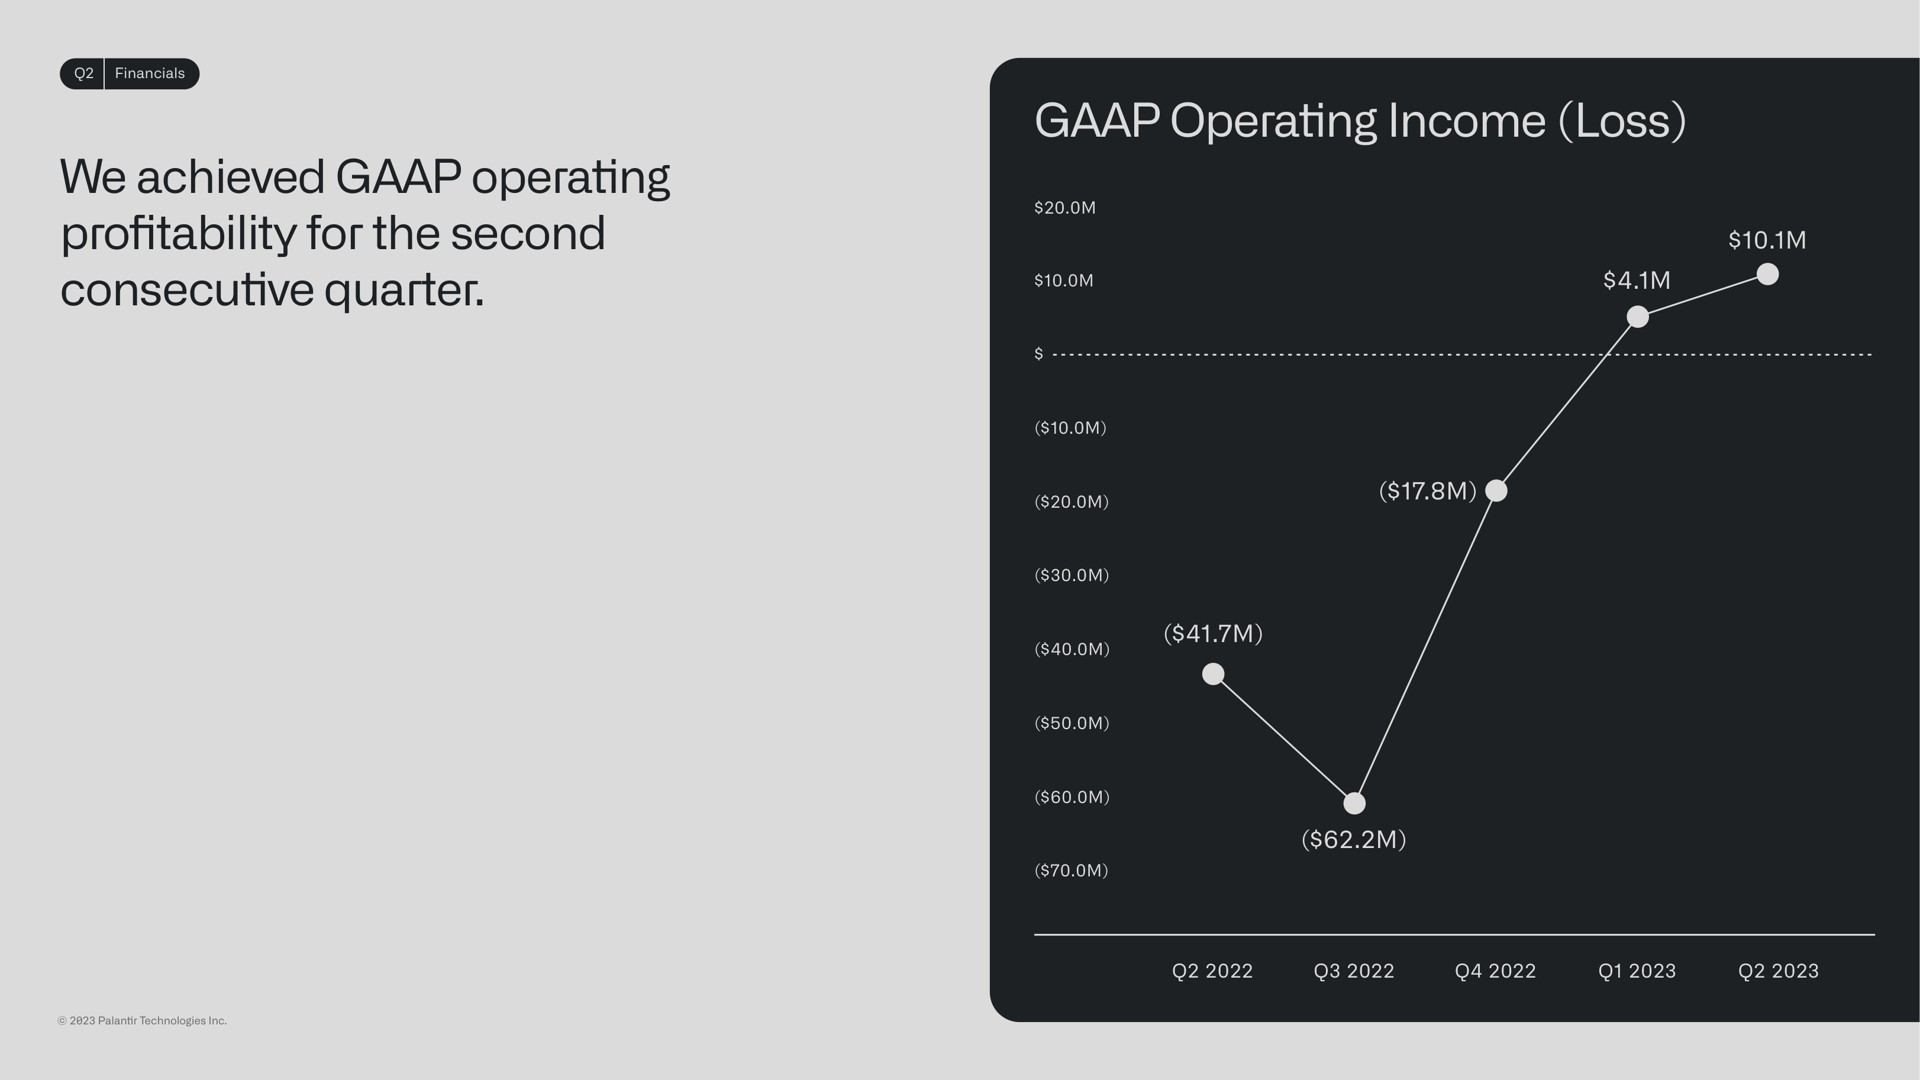 we achieved operating pro for the second consecutive quarter operating income loss profitability | Palantir